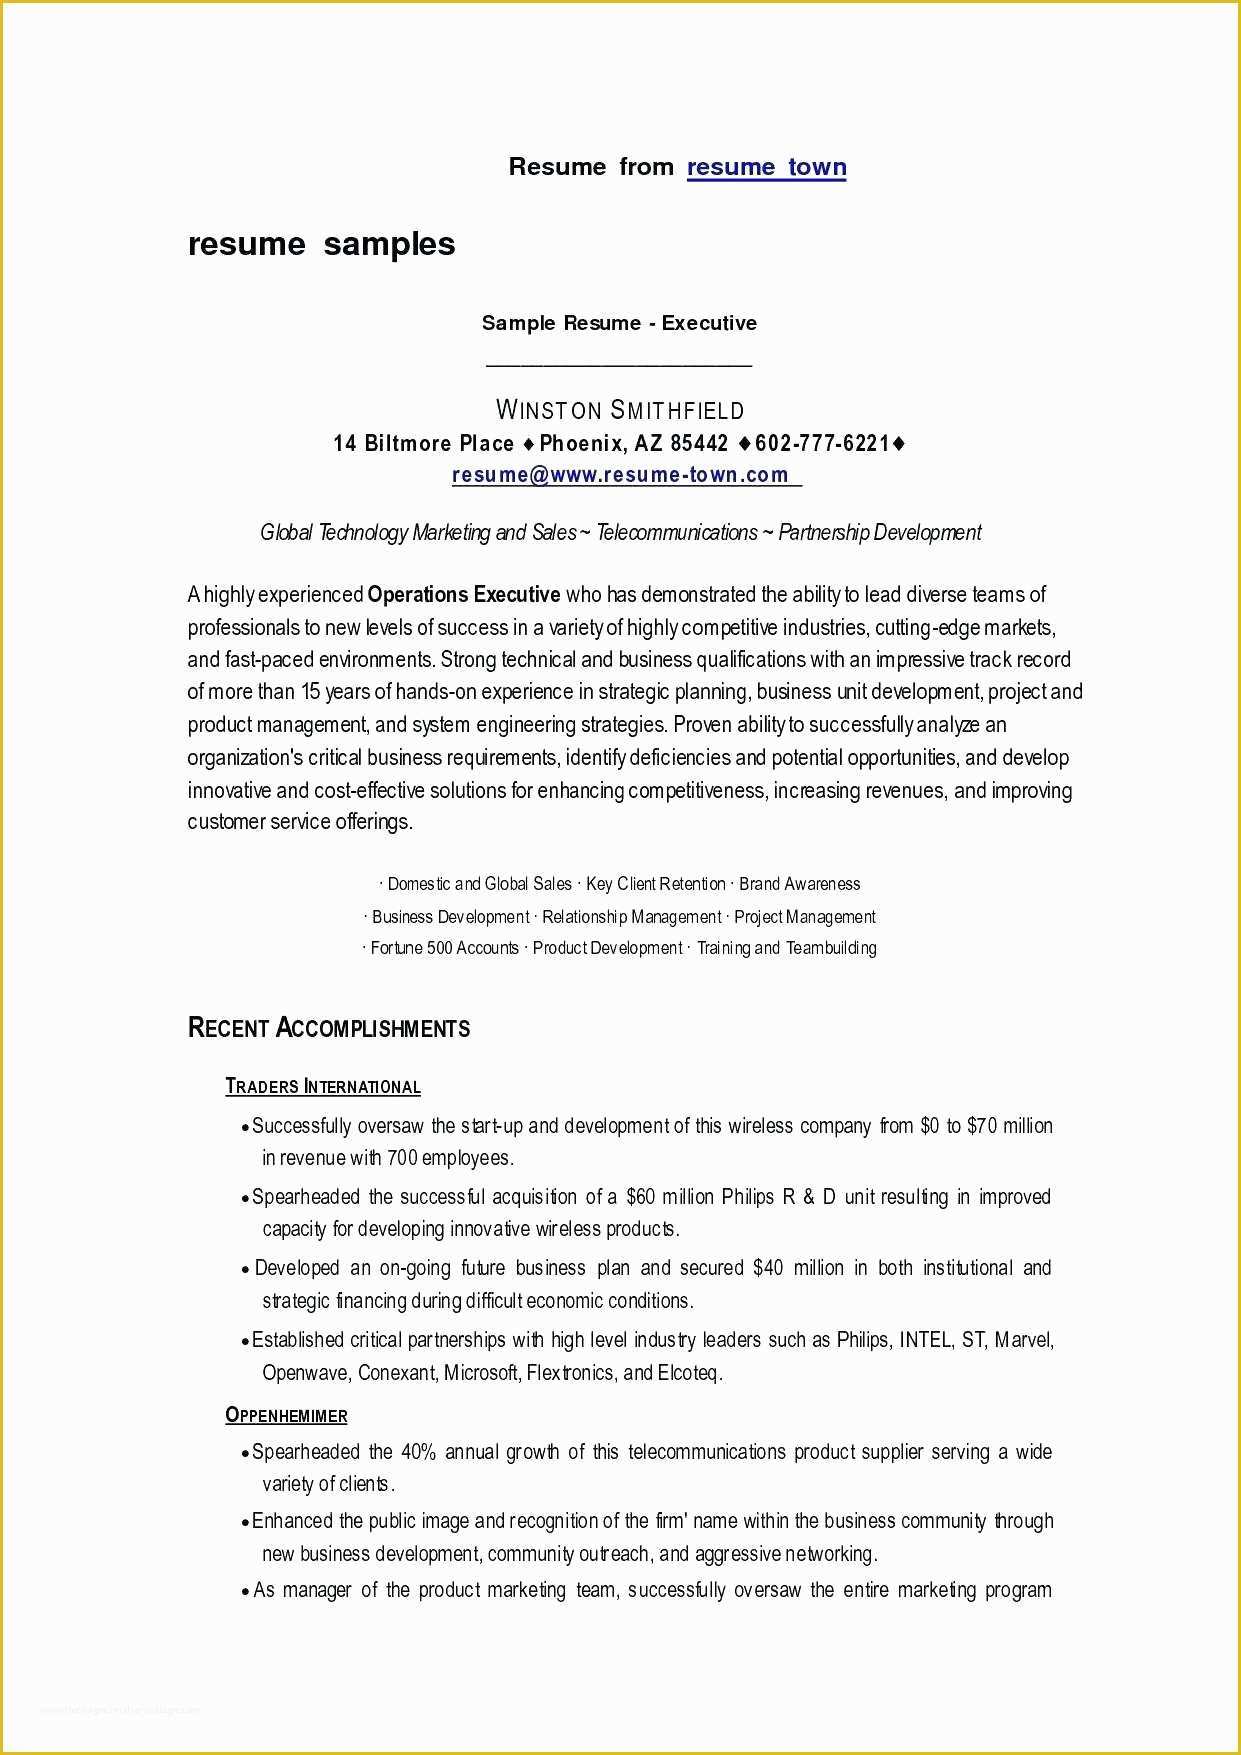 Free Resume Templates for Libreoffice Of Libreoffice Project Management Template Basic Award